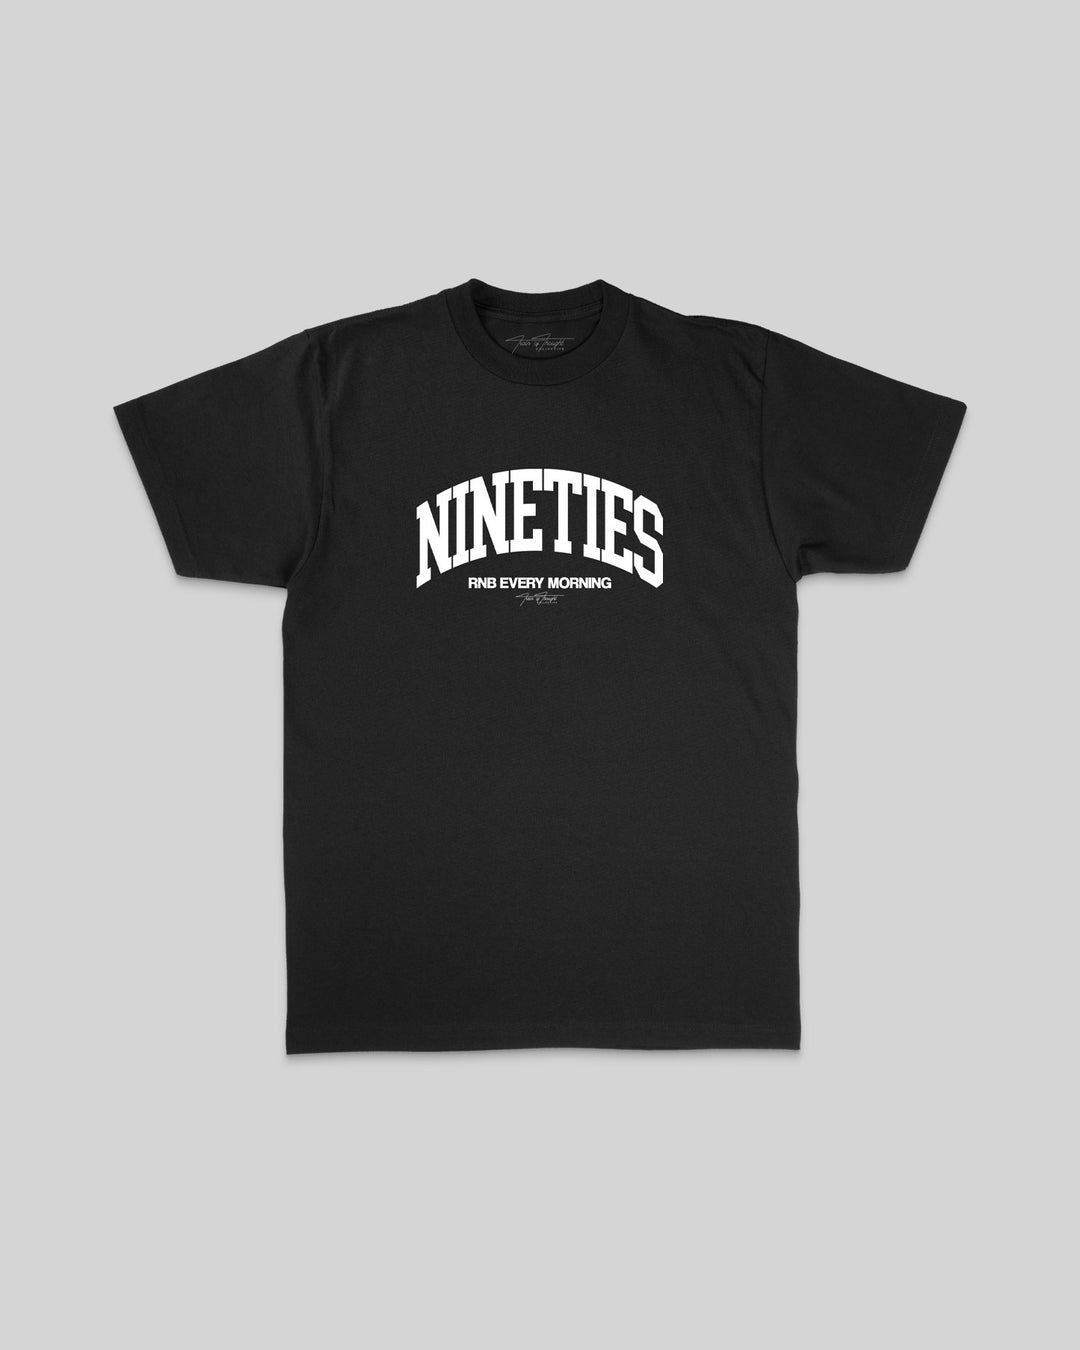 Nineties Rnb Every Morning Arch Black Tee - trainofthoughtcollective